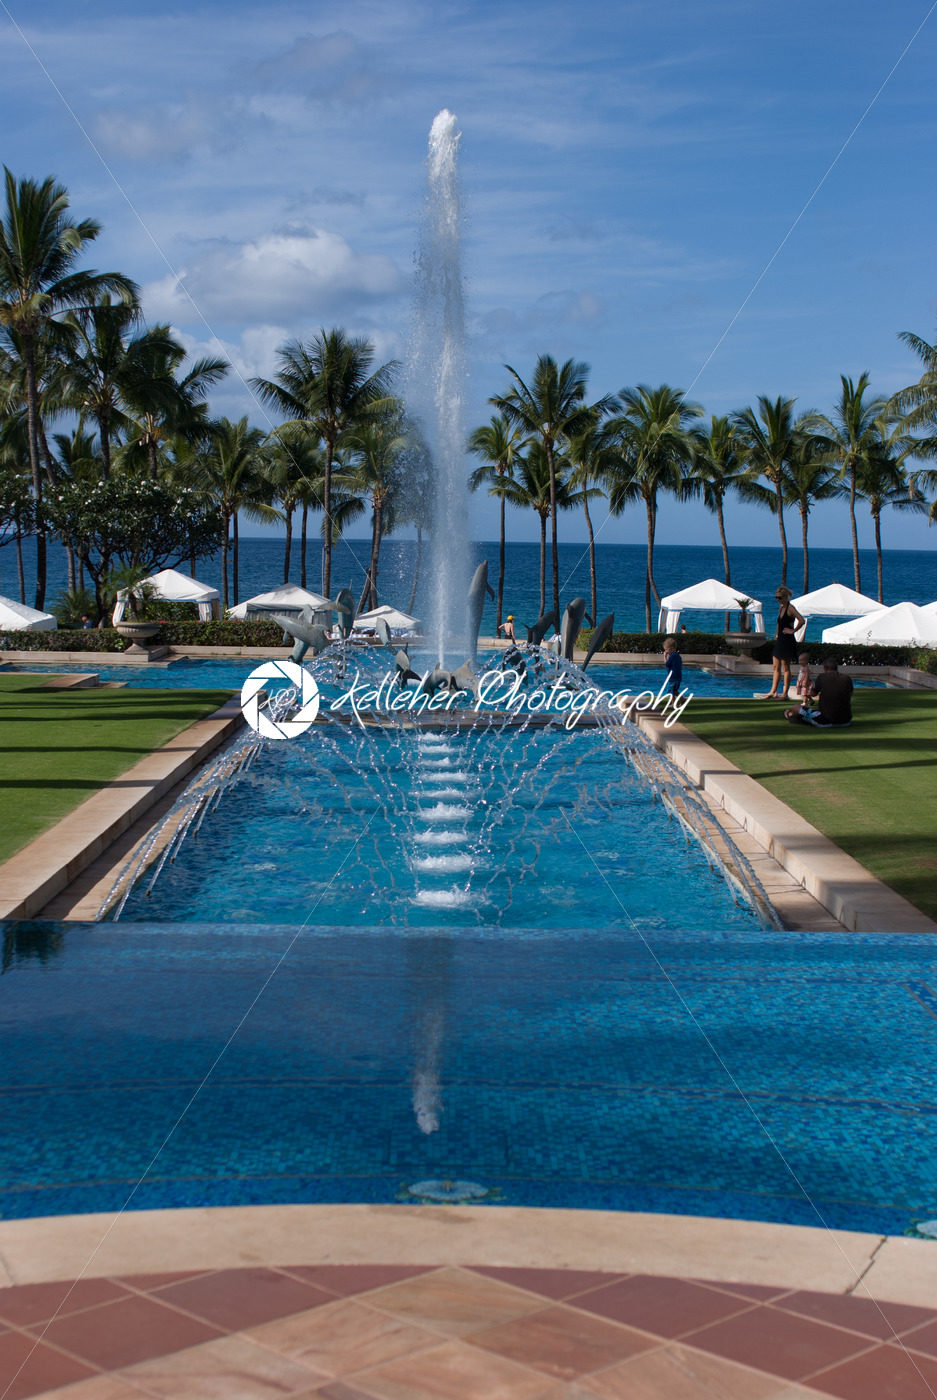 MAUI, HI – DECEMBER 15: The Grand Wailea, a Waldorf Astoria hotel, is one of several resorts in the exclusive Wailea area on the West shore of the Hawaiian island of Maui - Kelleher Photography Store